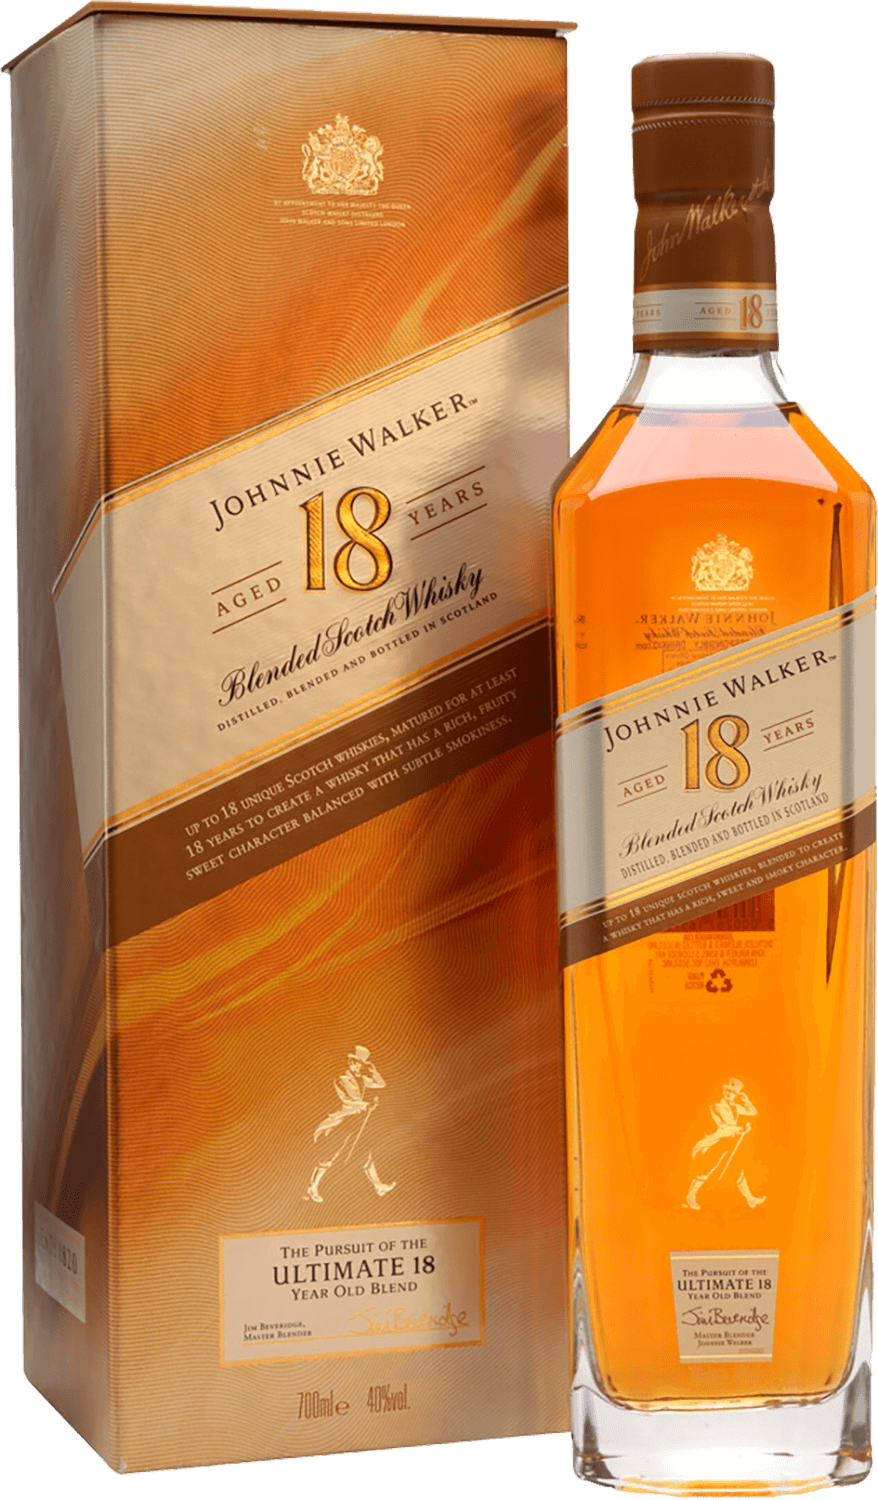 Johnnie Walker 18 y.o. Blended Scotch Whisky (gift box)